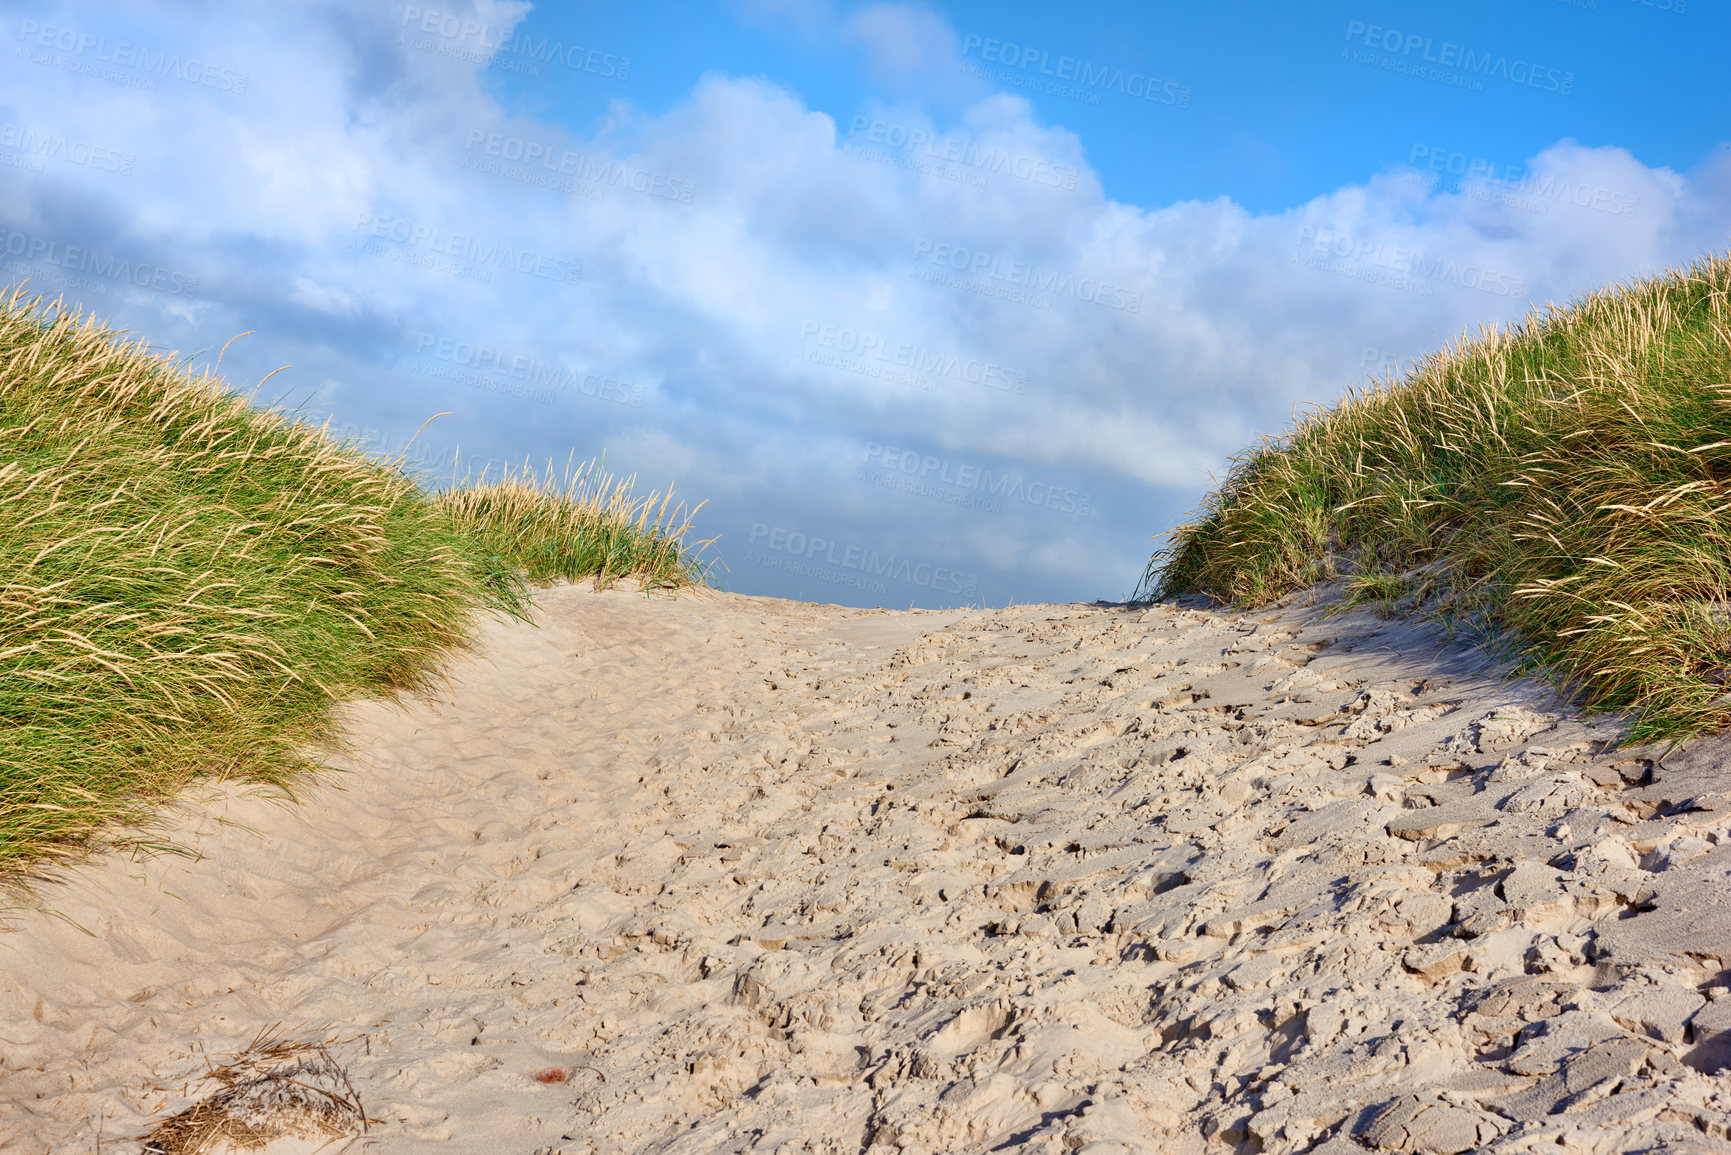 Buy stock photo Closeup of a sand path with lush green grass growing on the west coast beach of Jutland, Denmark. Beautiful blue skies on a warm summer day over a dry sand dune situated on a coastline bay area